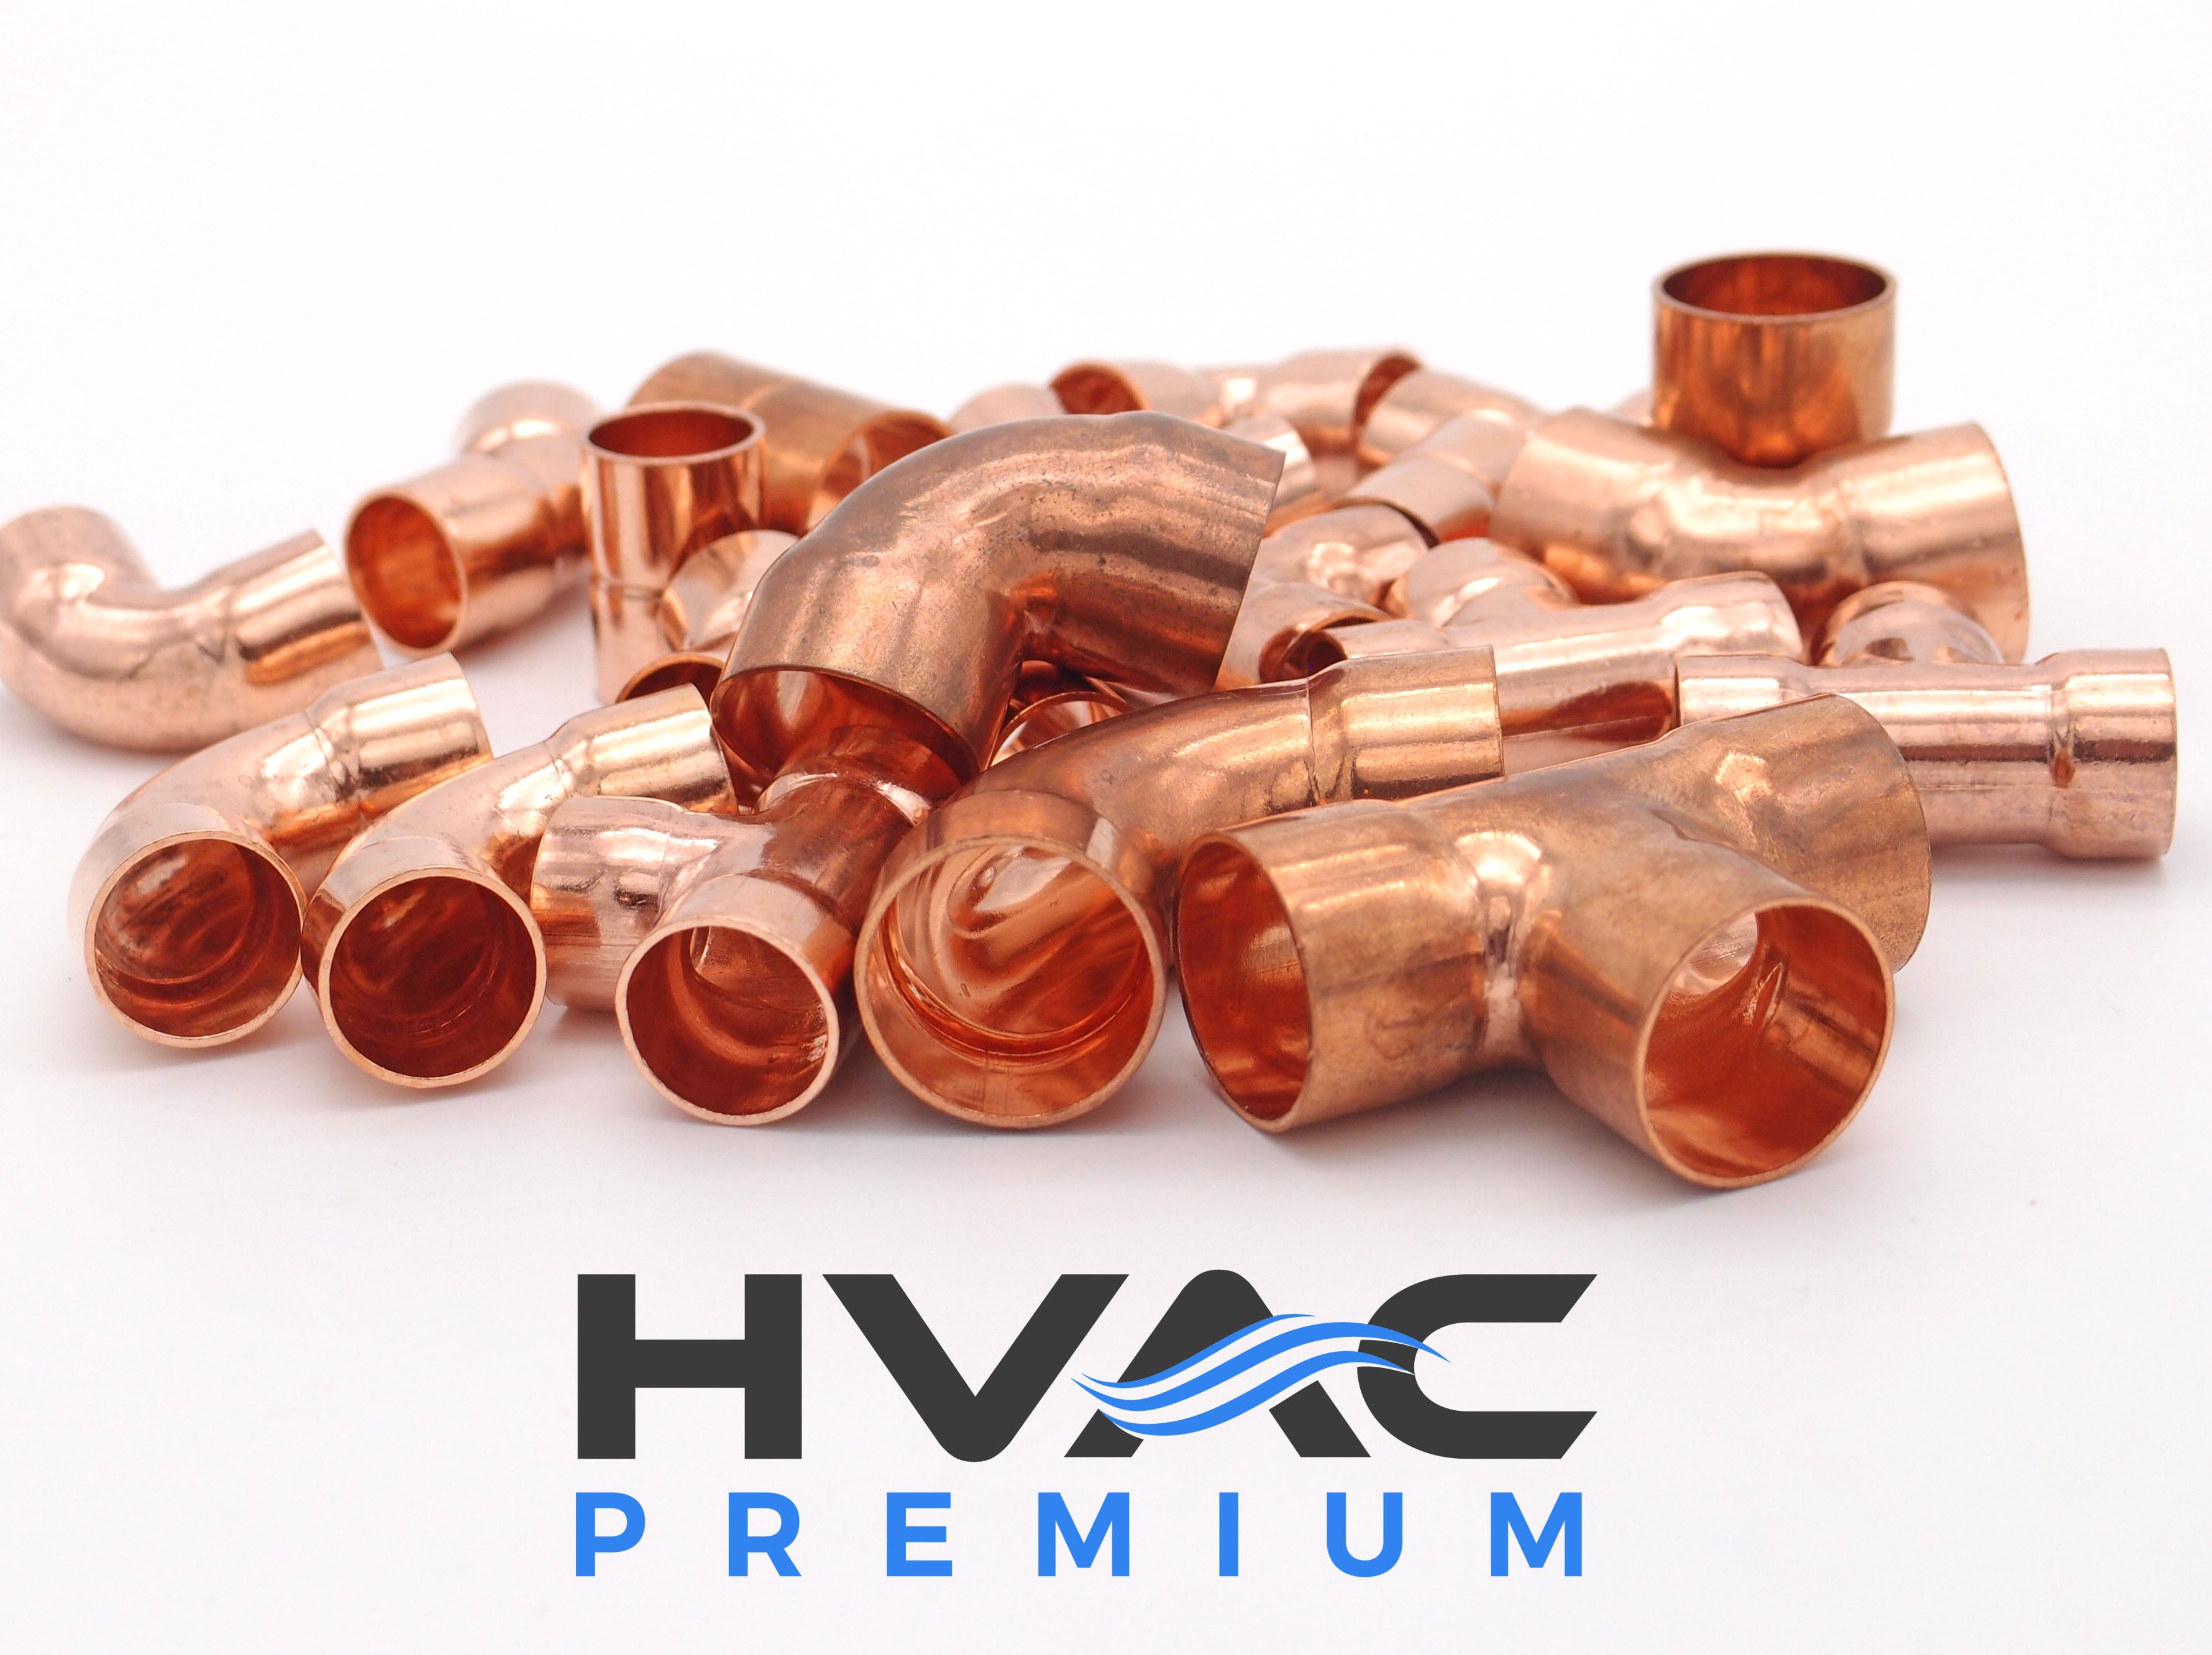 Copper Fitting 1-1/8 Inch (HVAC Outer Dimension) 1 Inch (Plumbing Inner Dimension) - 45 Degree Copper Pressure Elbow For Plumbing & HVAC – 99.9% Pure Copper - 5 Pack